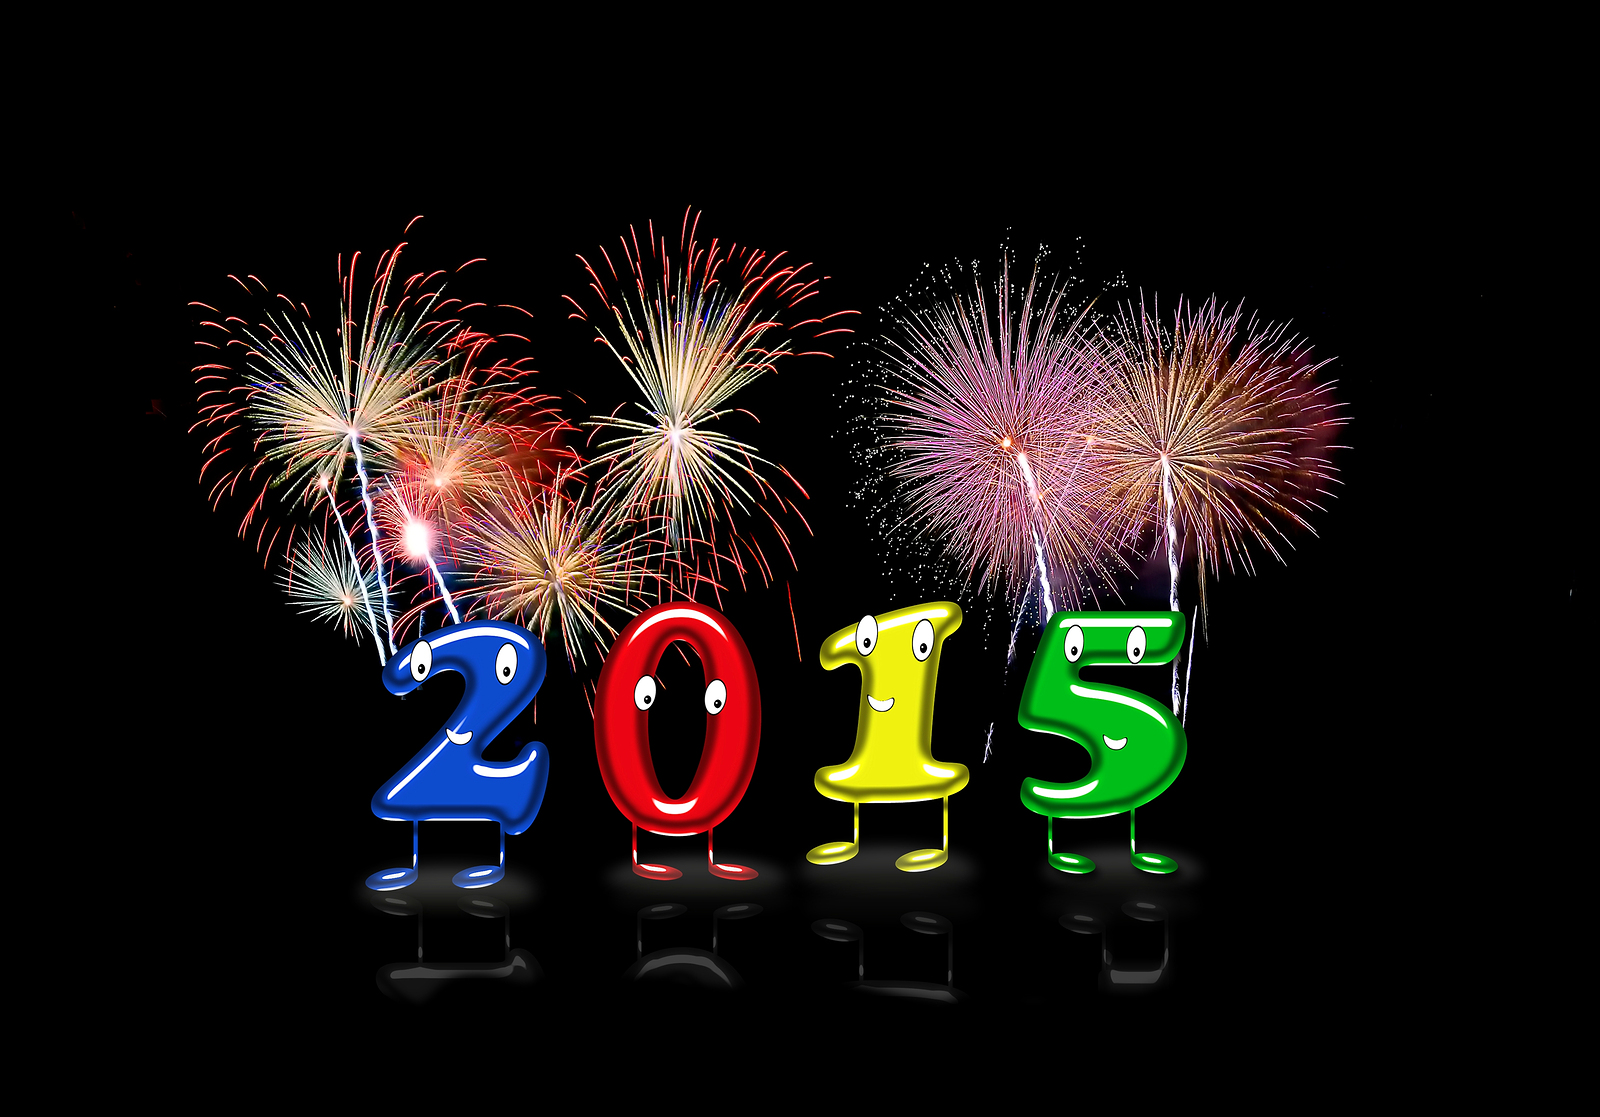 holiday, new year 2015, celebration, fireworks, new year, party